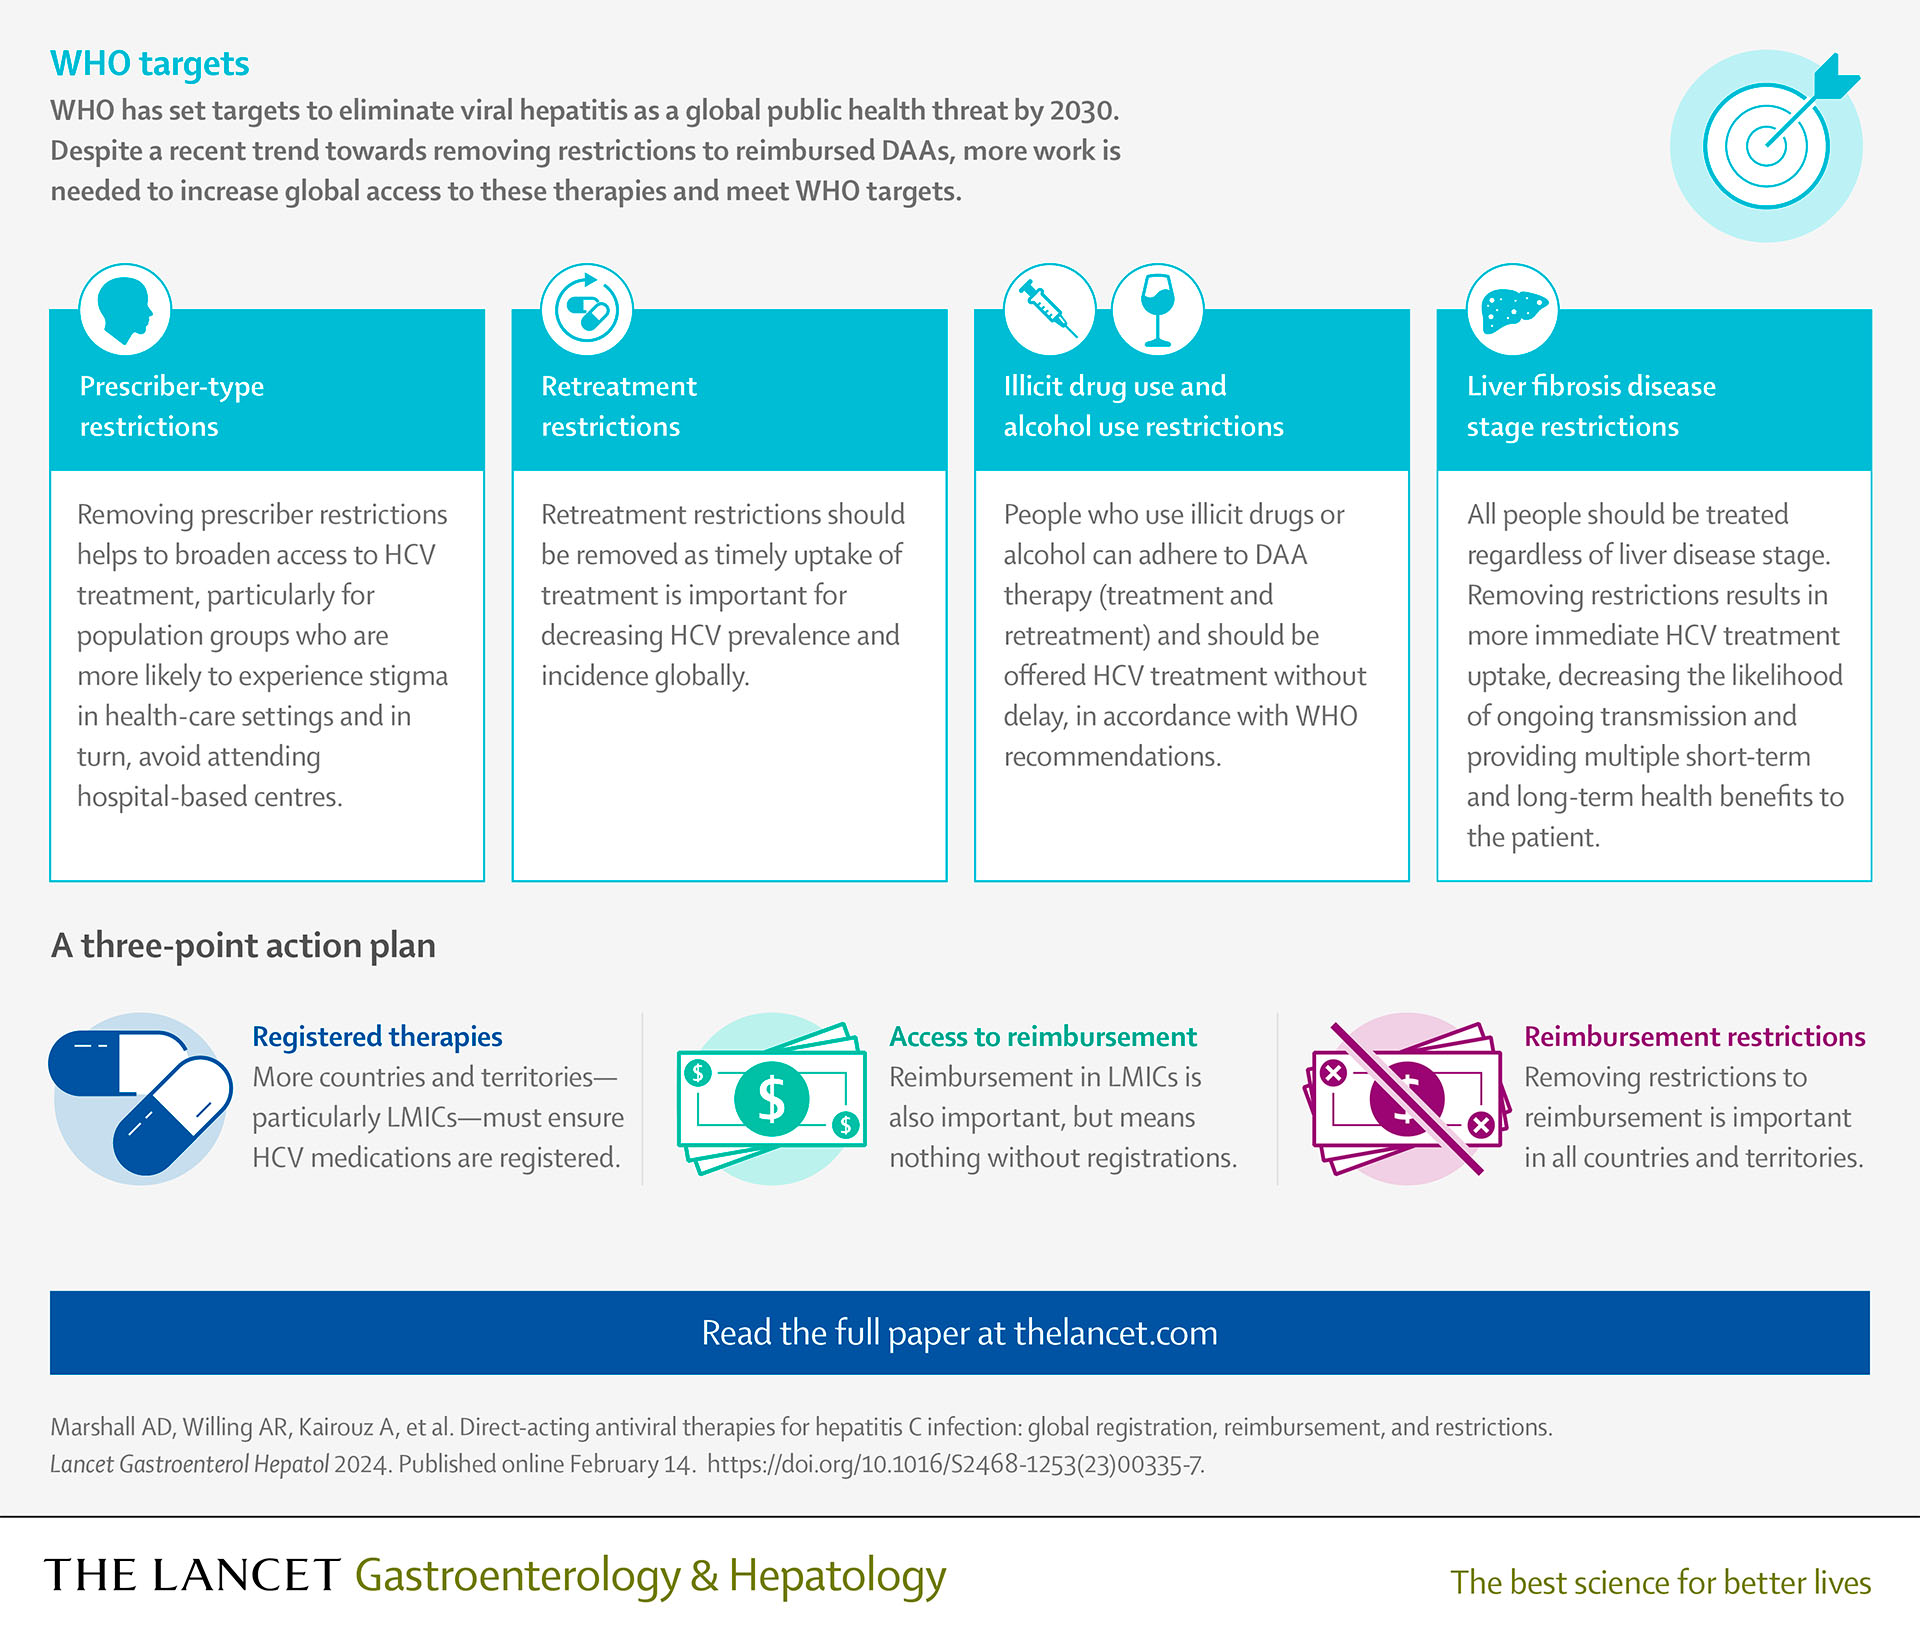 Infographic on WHO targets to eliminate viral hepatitis as a global public health threat by 2030.